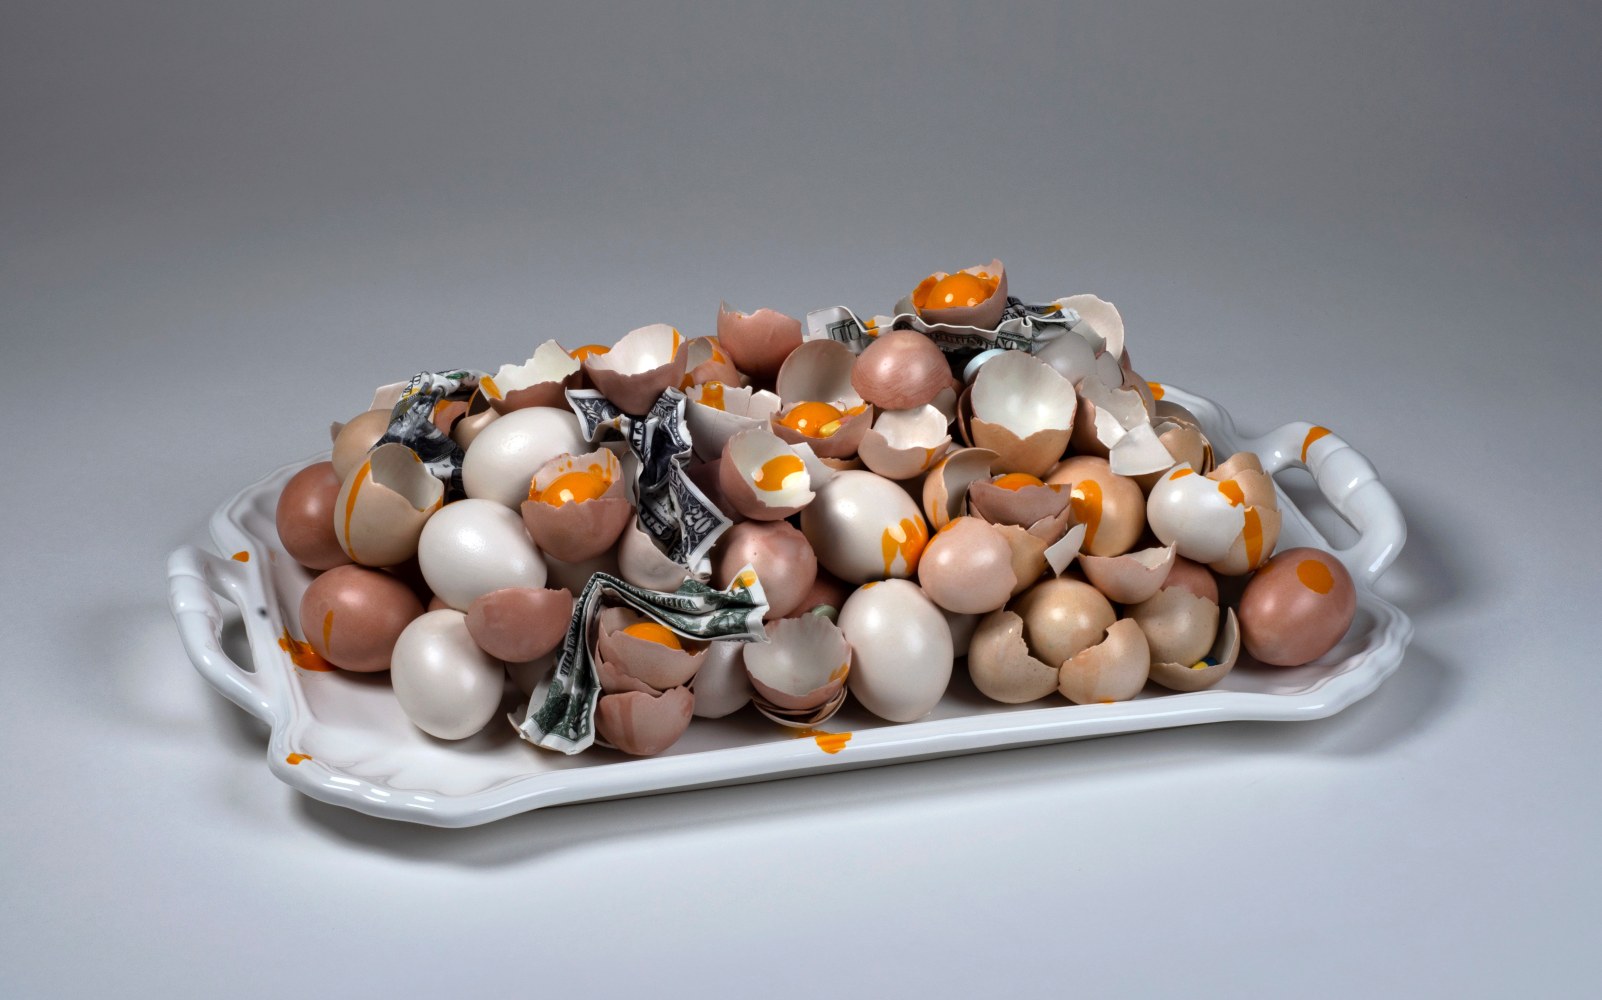 A ceramic tray with two handles holding a number of eggs and broken eggshells with crumpled dollar bills and runny egg yolks